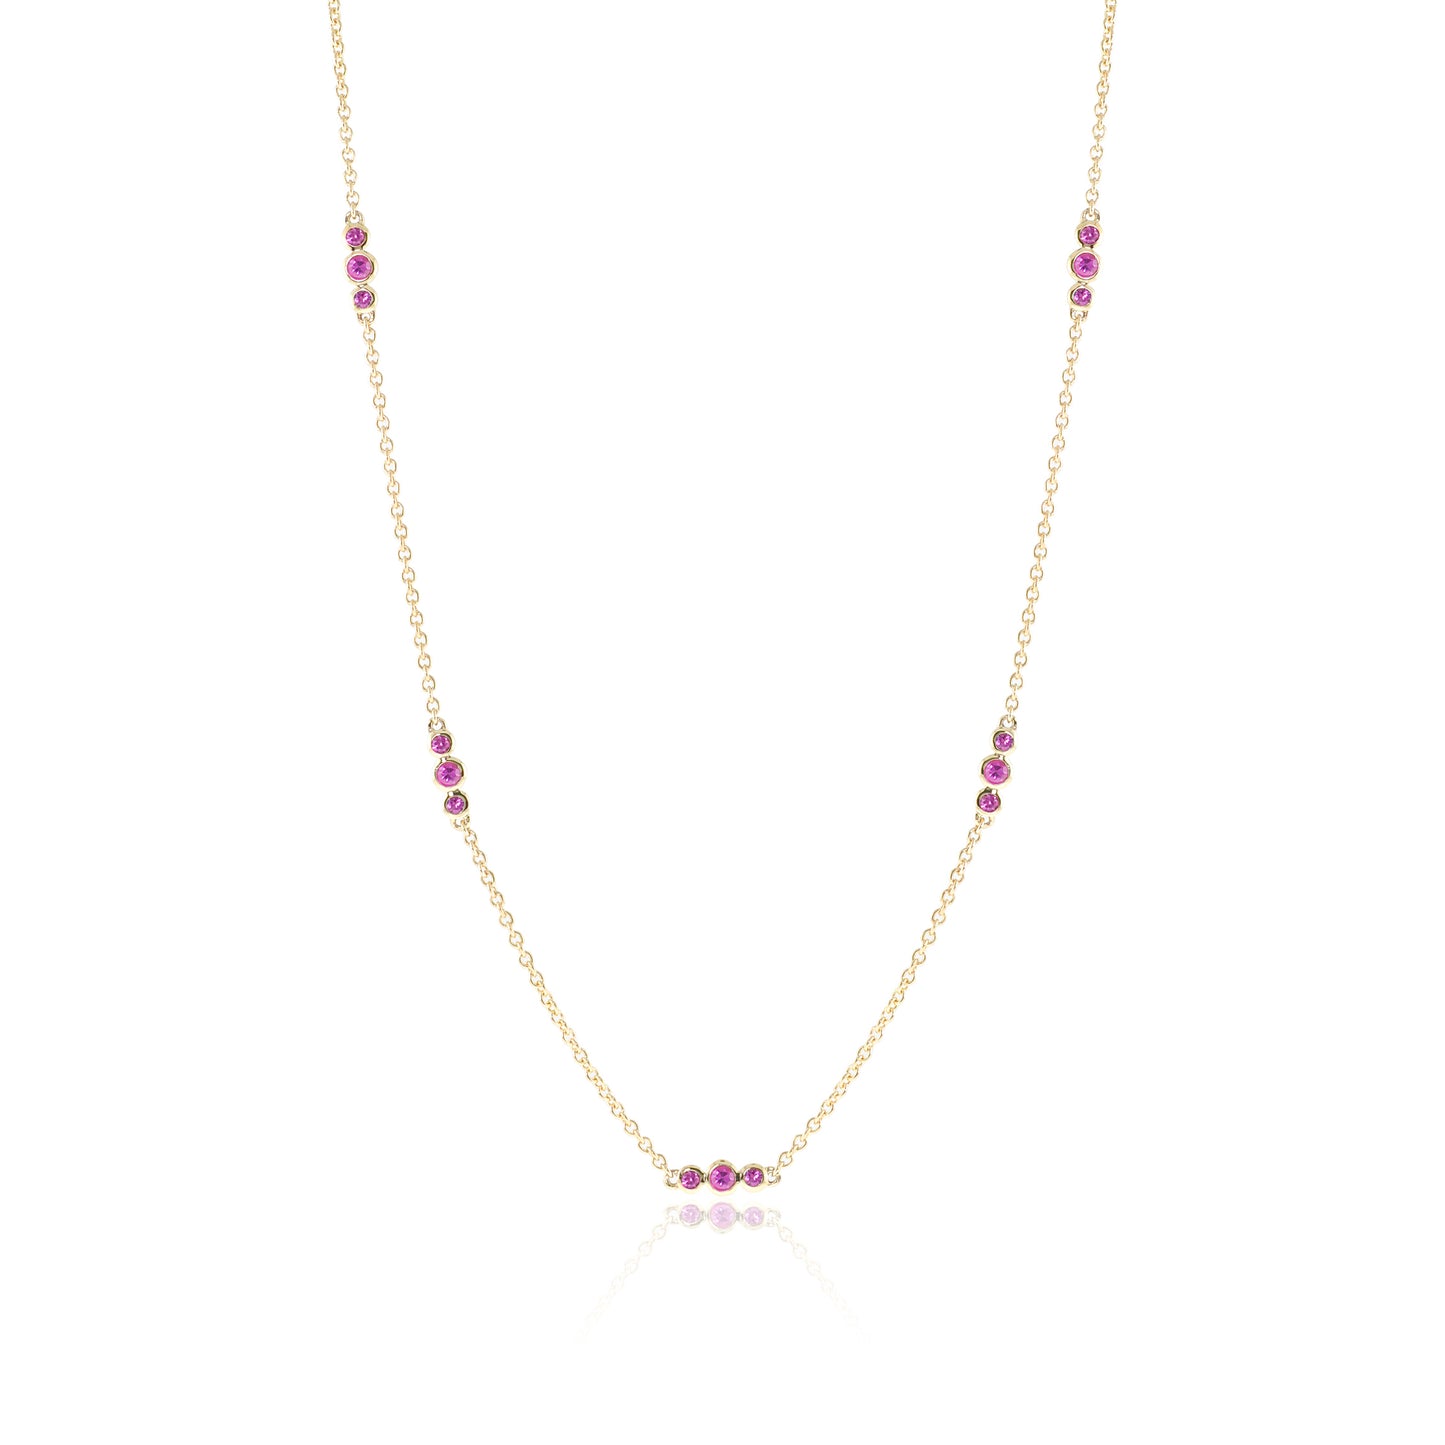 Gump's Signature Triplets Necklace in Pink Sapphires